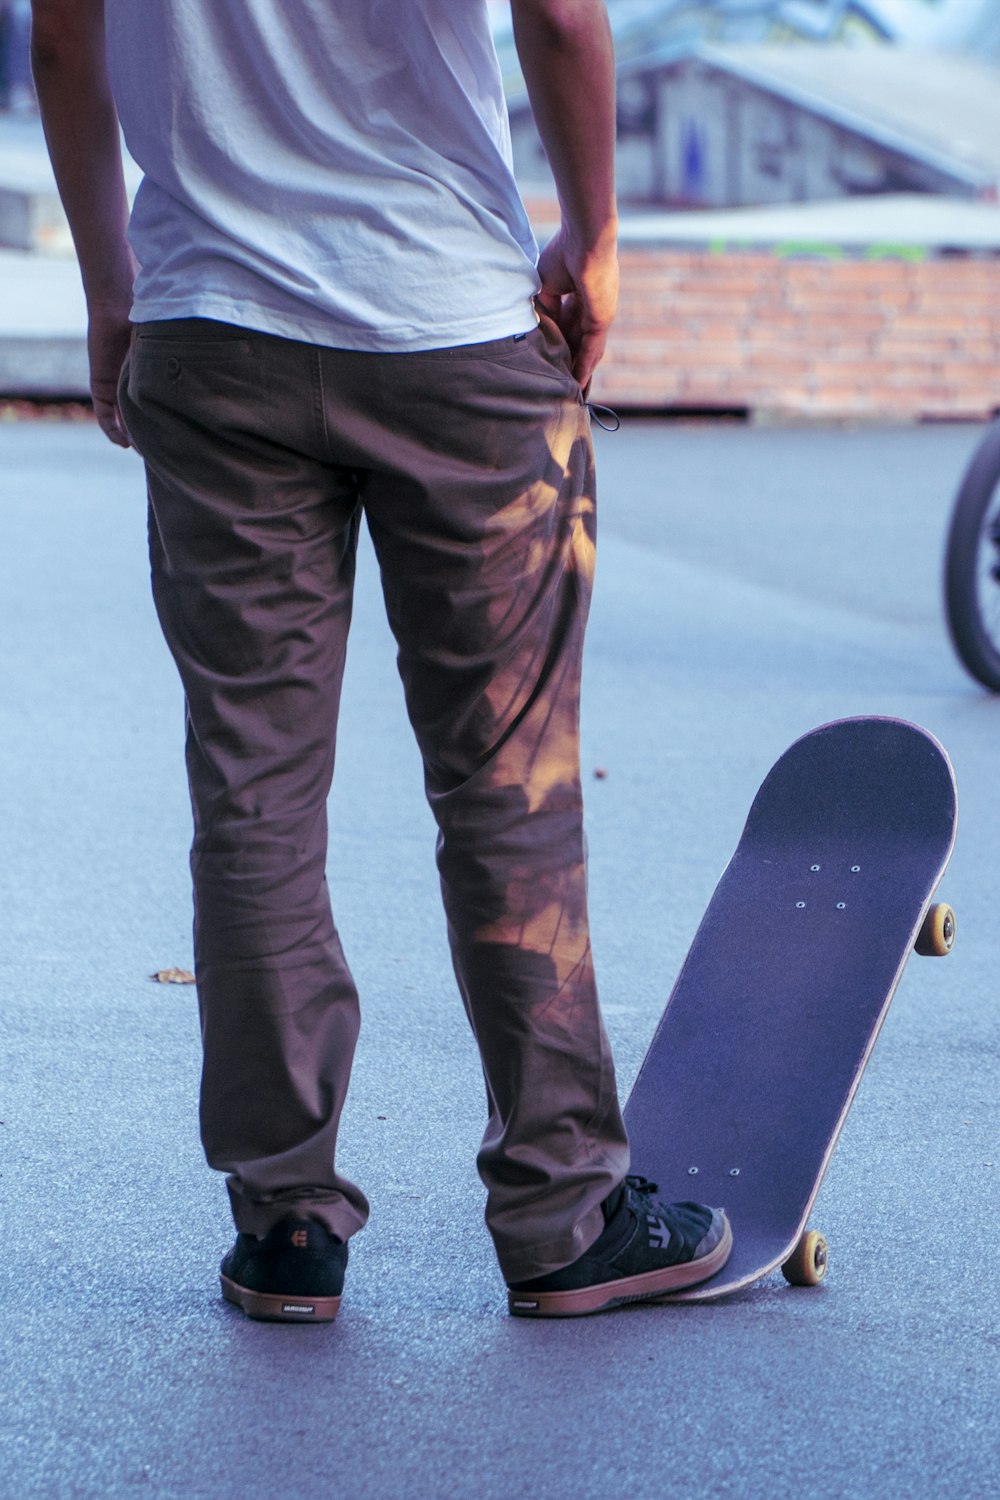 man in gray shirt and brown pants holding black skateboard